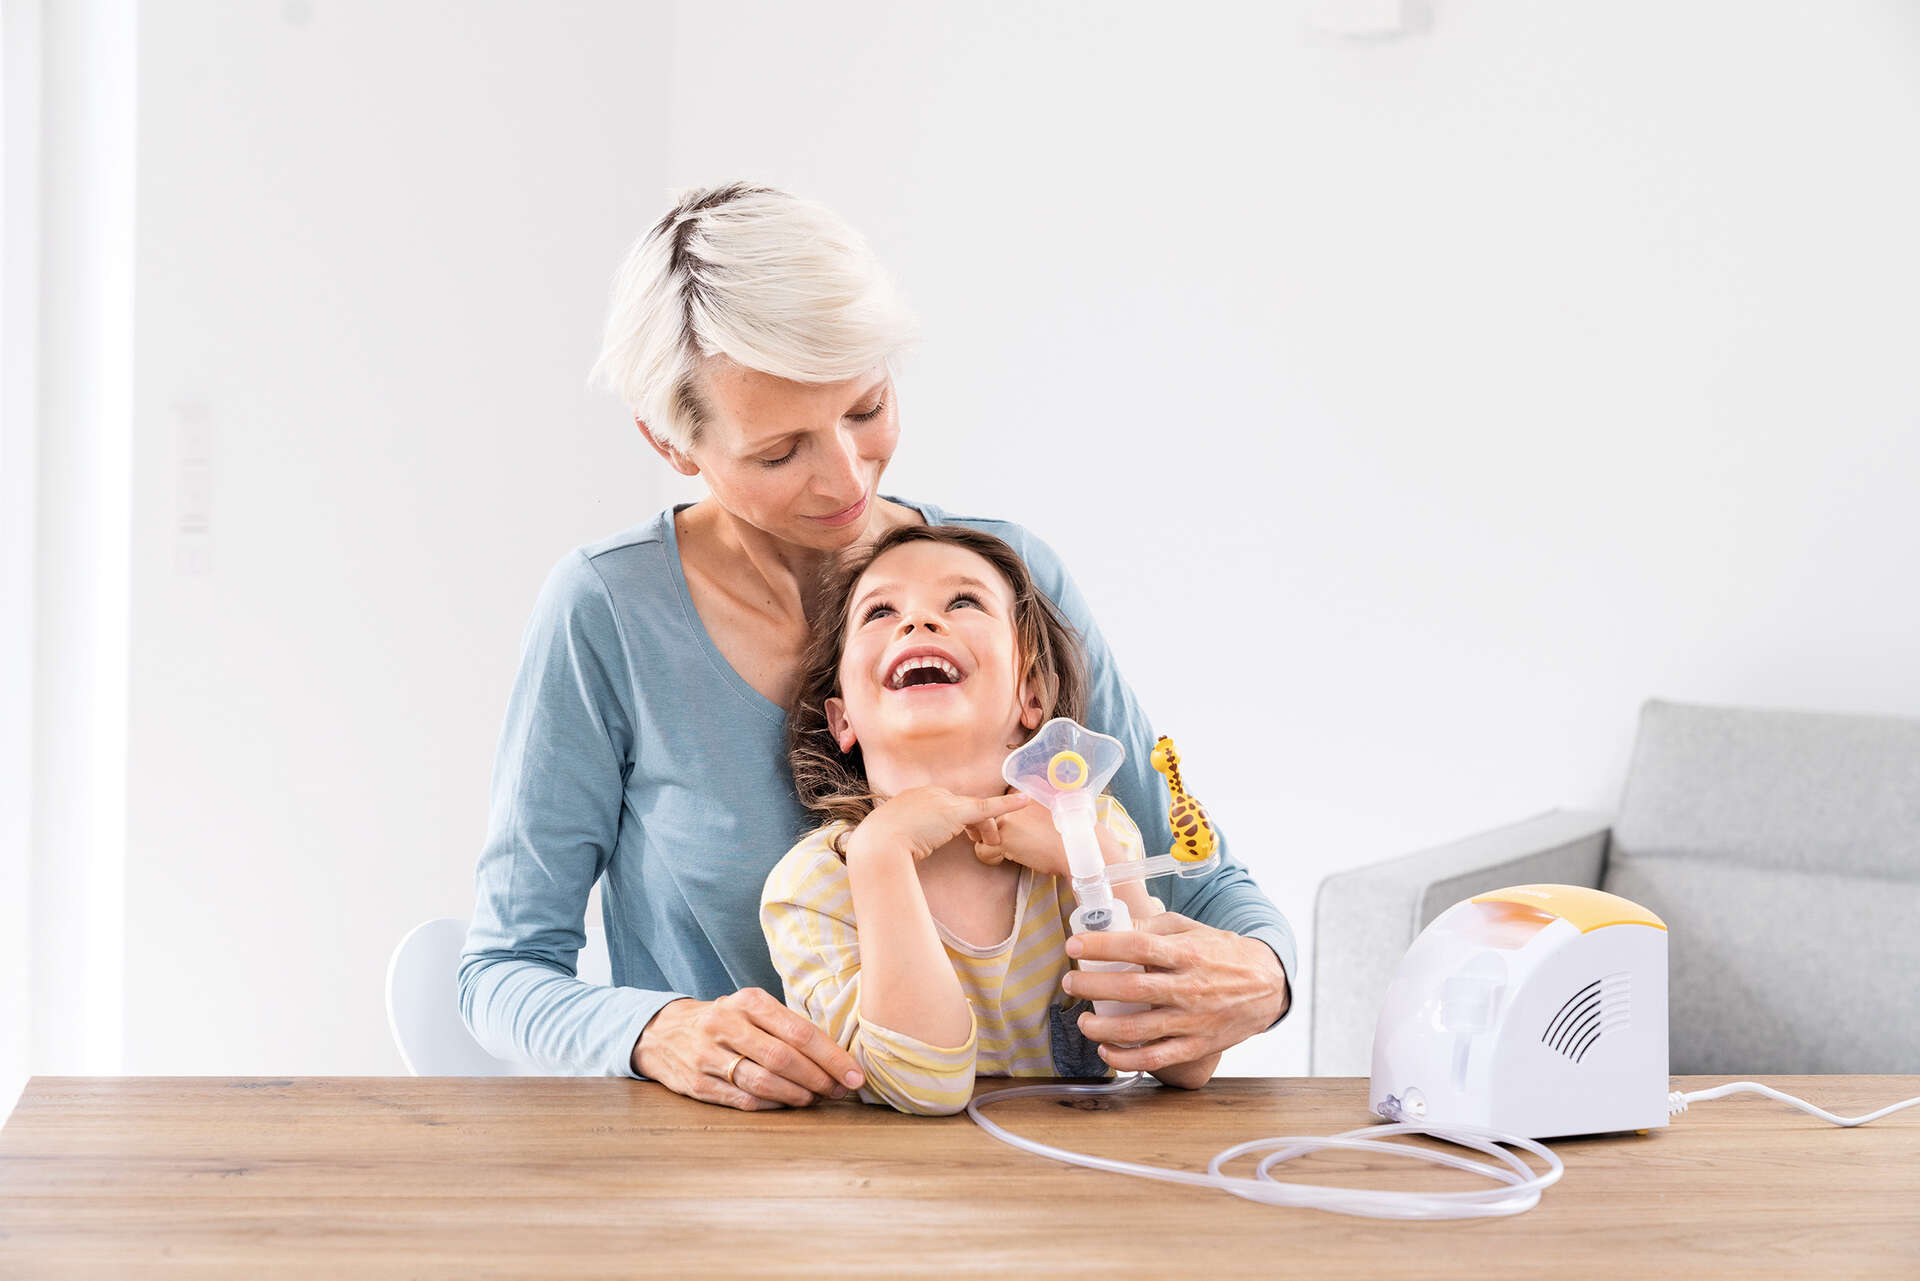 The Beurer IH26 makes nebulising easy and fun!